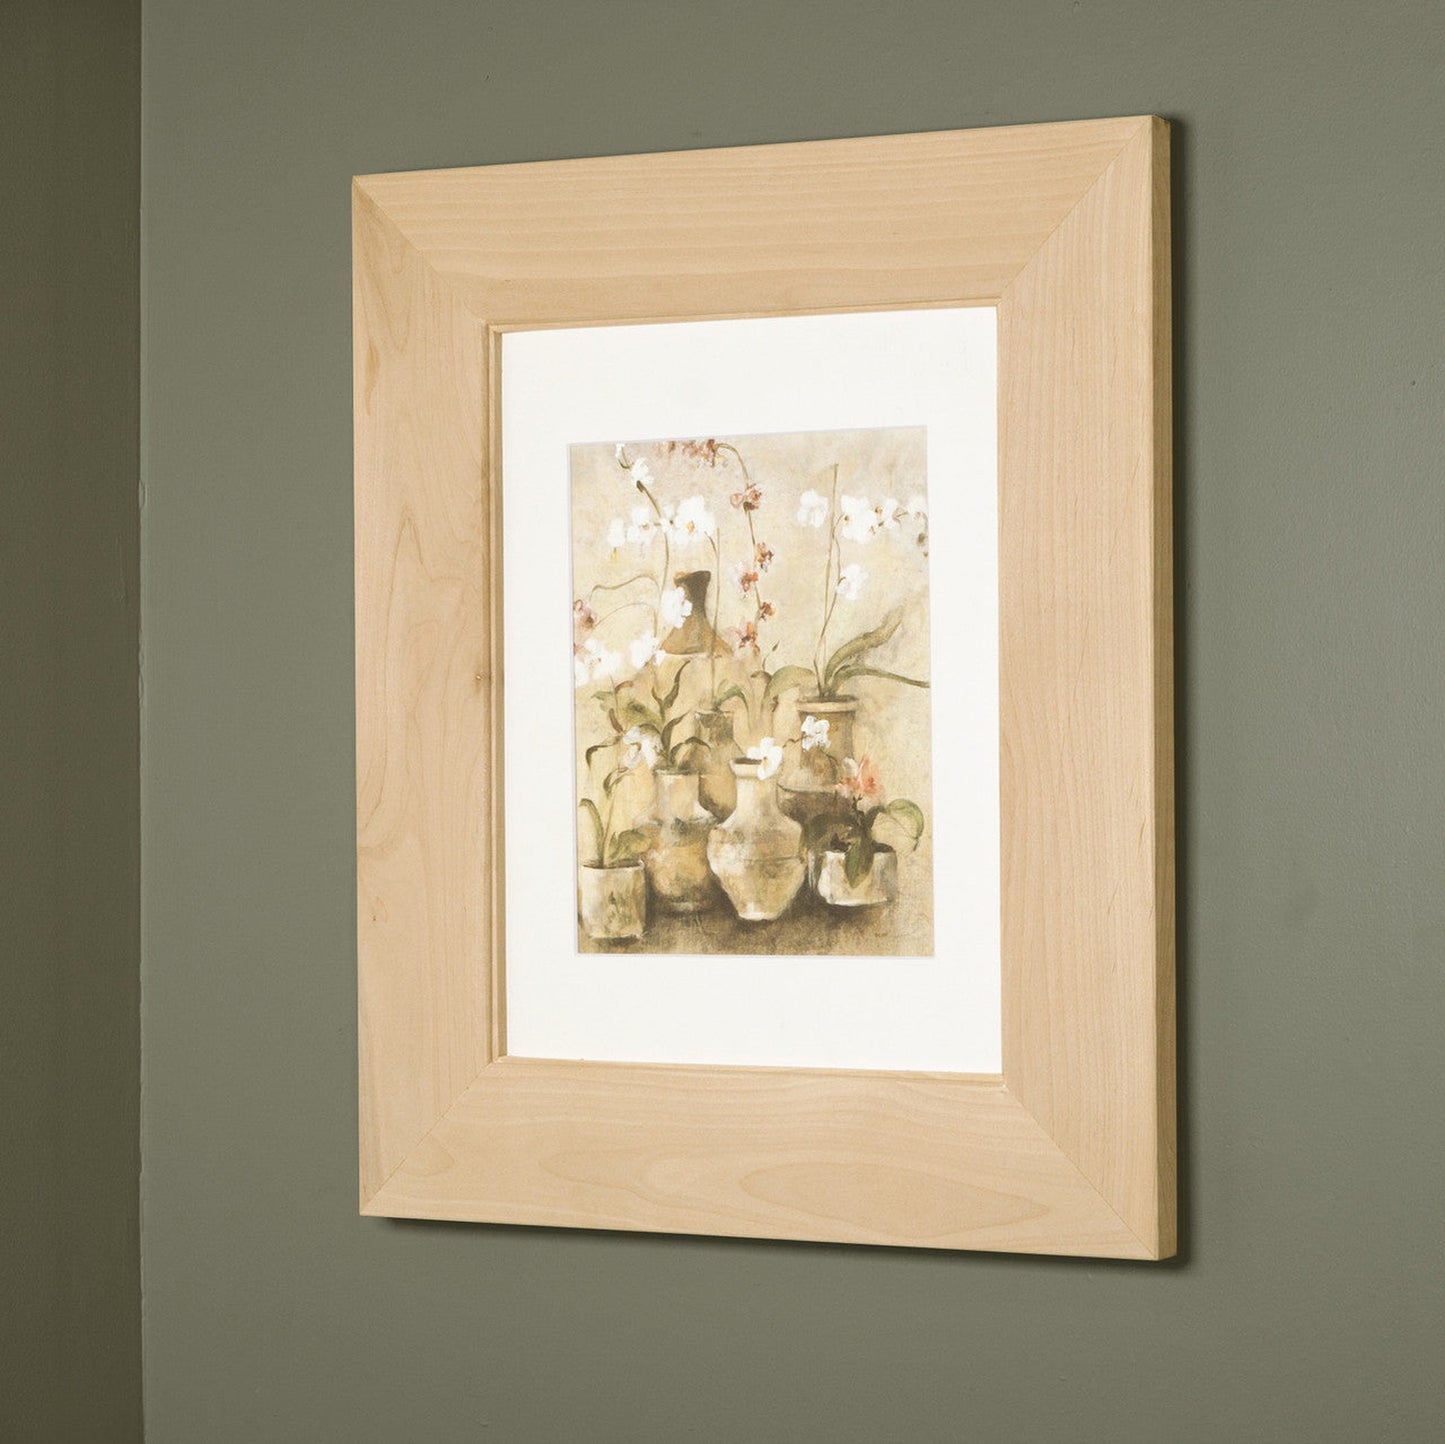 Fox Hollow Furnishings 14" x 18" Large Unfinished Special 3" Depth White Interior Recessed Picture Frame Medicine Cabinet